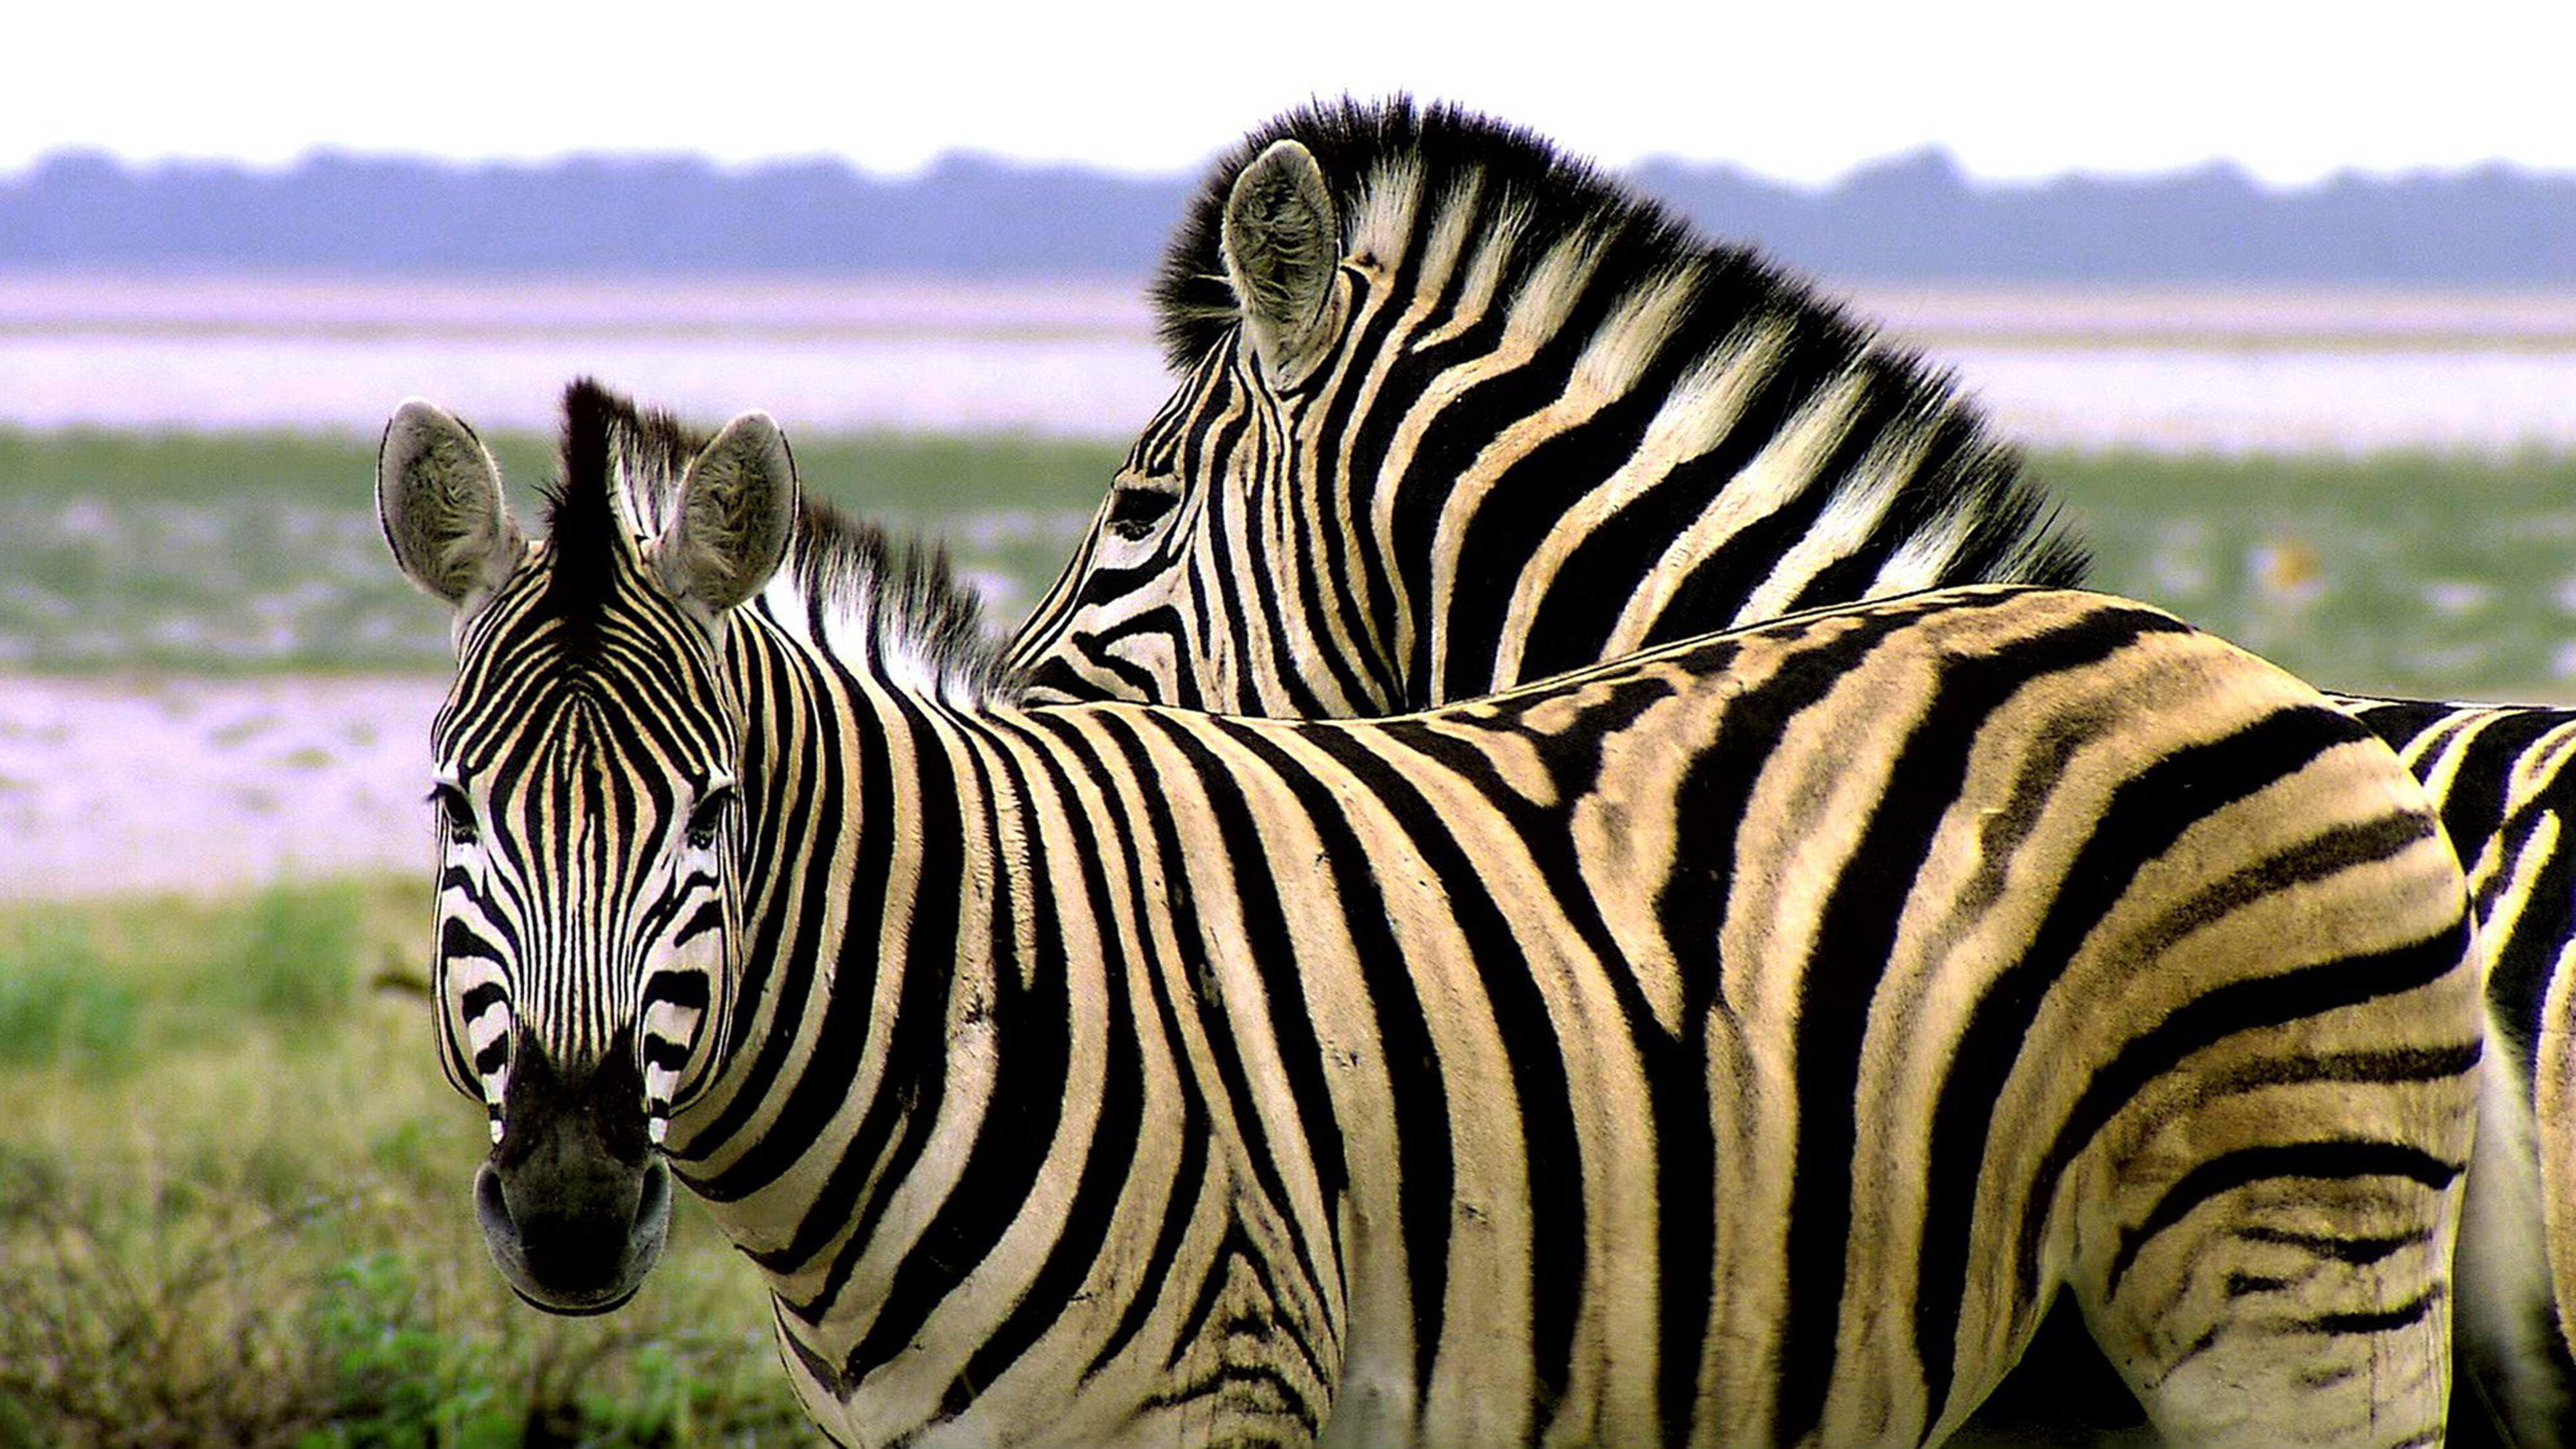 3840x2160 animals of africa zebra striped like a tiger hd wallpaper hd images amazing  background images mac desktop wallpapers free 4k pictures smart phone  3840Ã2160 ...